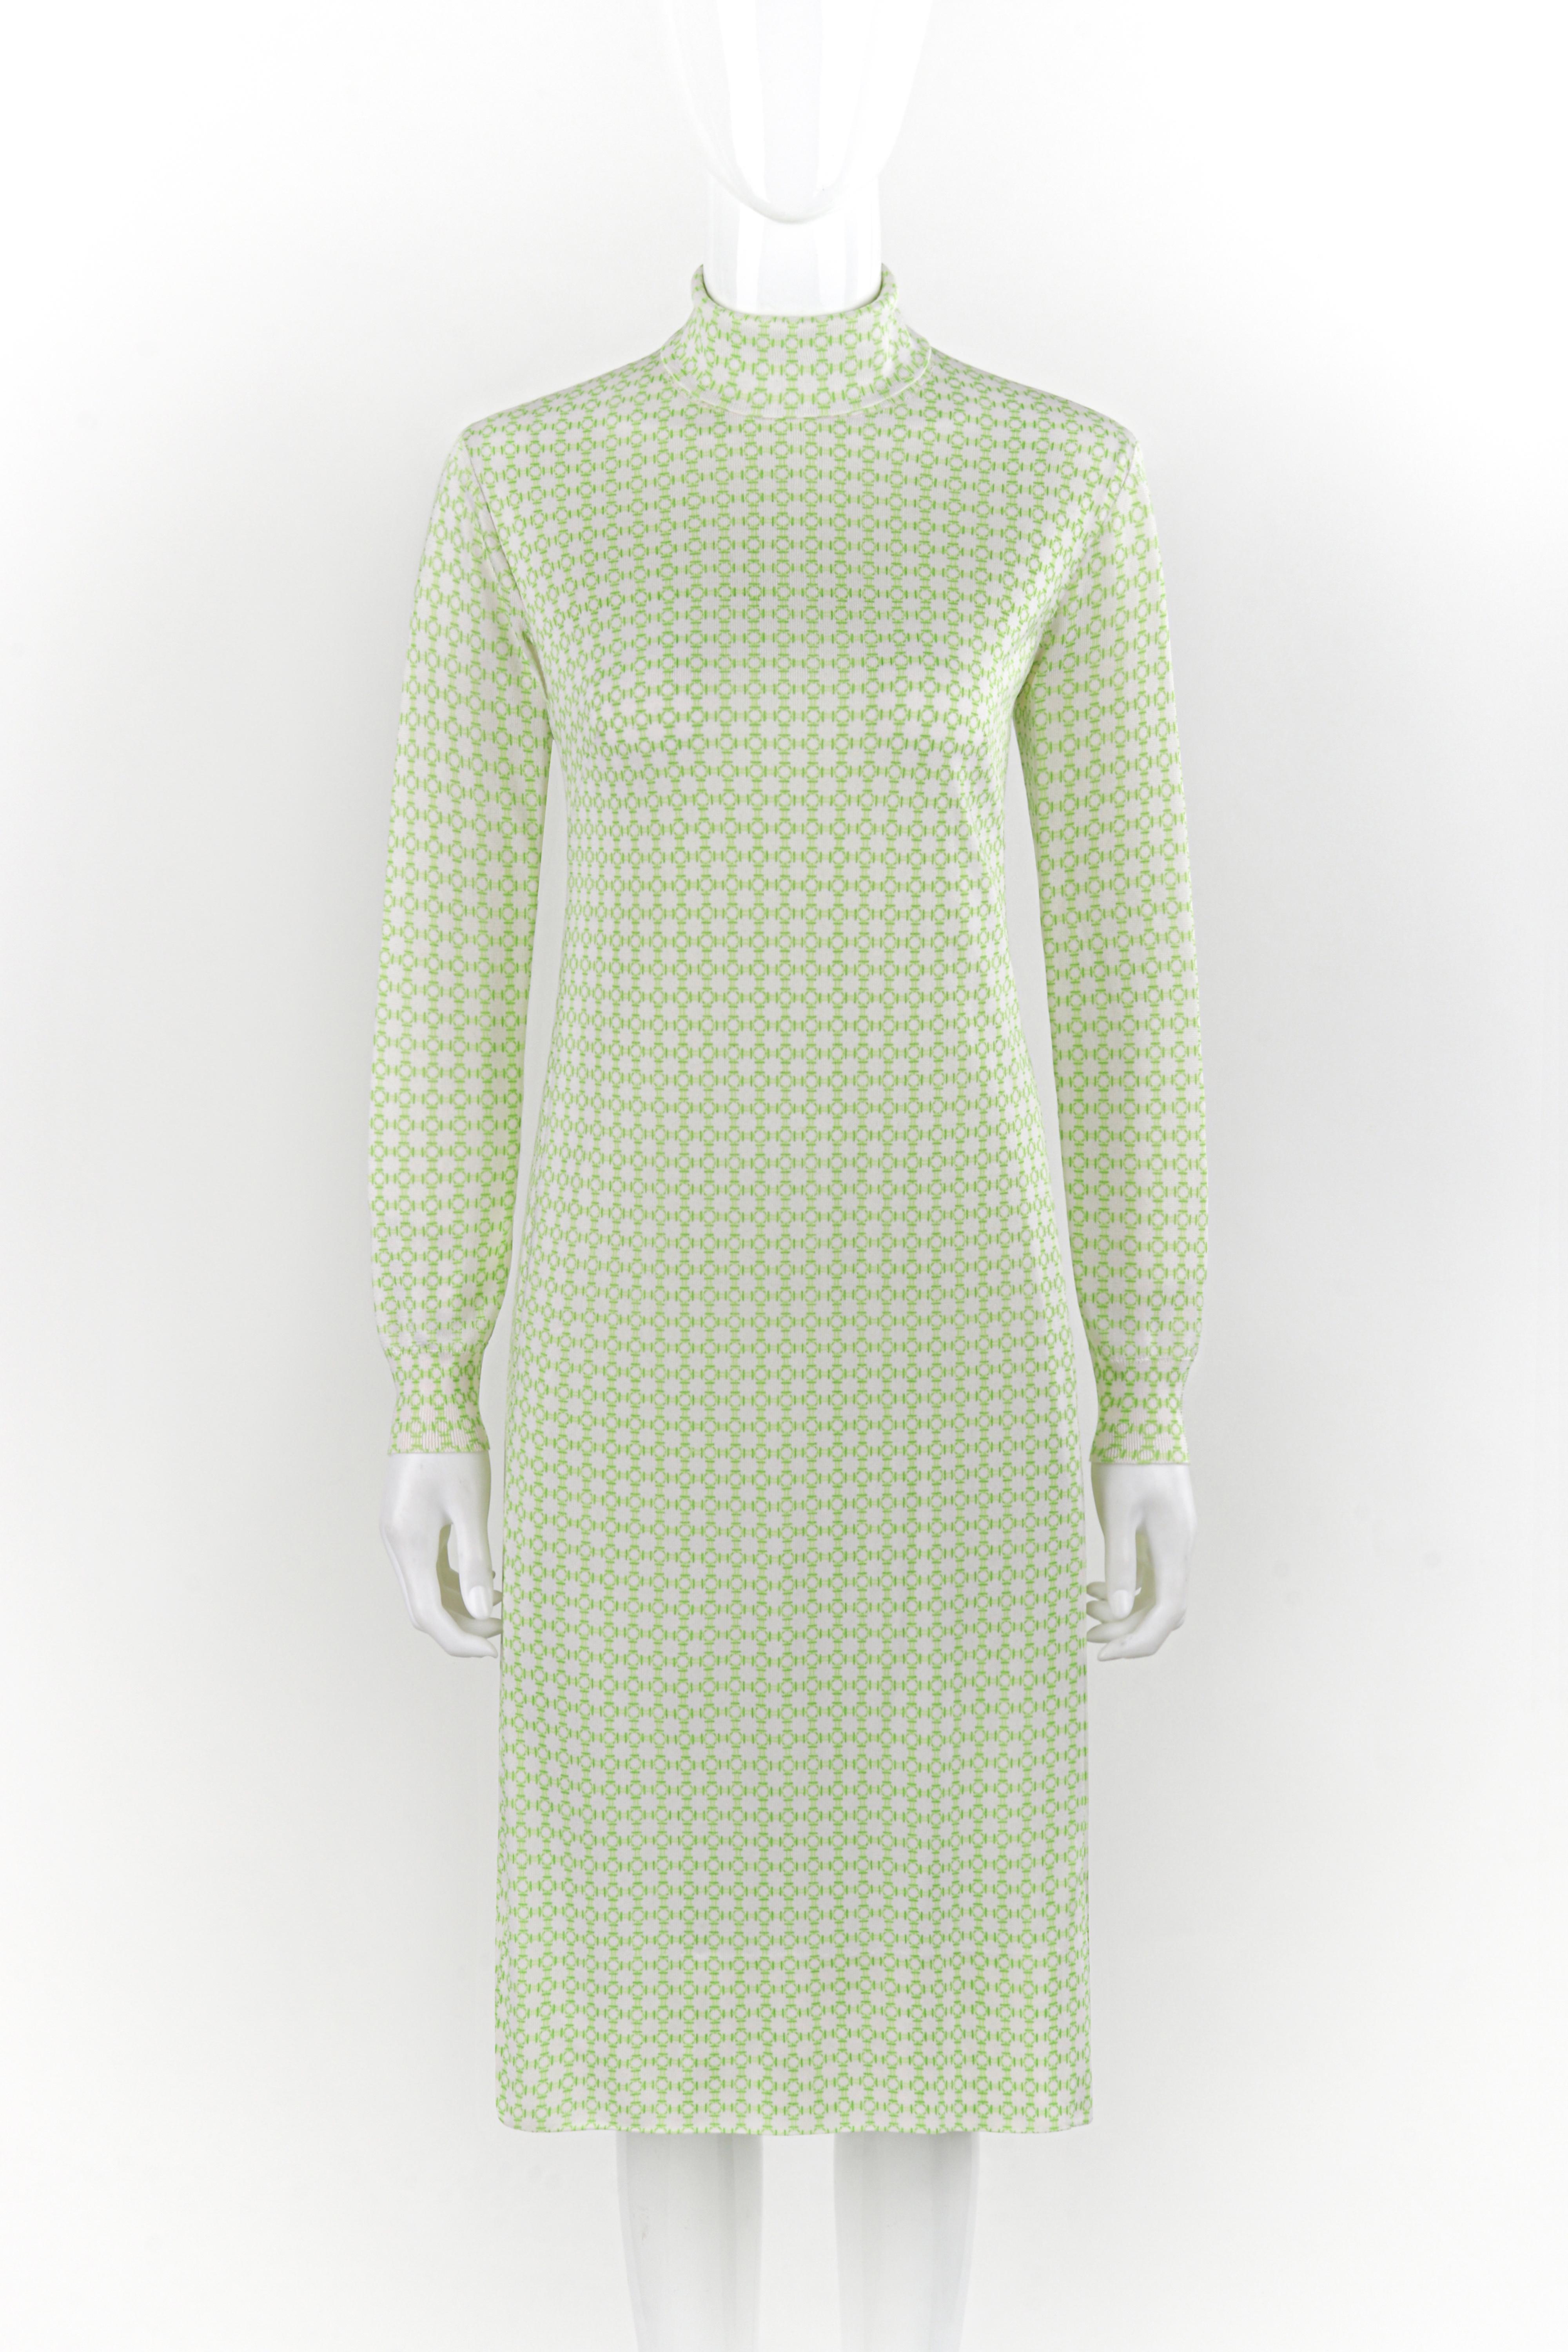 Brand / Manufacturer: Hermes
Circa: 1970s
Style: Midi Dress
Color(s): Shades of green, white
Lined: No
Unmarked Fabric Content (feel of): Jersey knit (primary fabric)
Additional Details / Inclusions: Hermes circa 1970s long sleeve midi dress. Soft